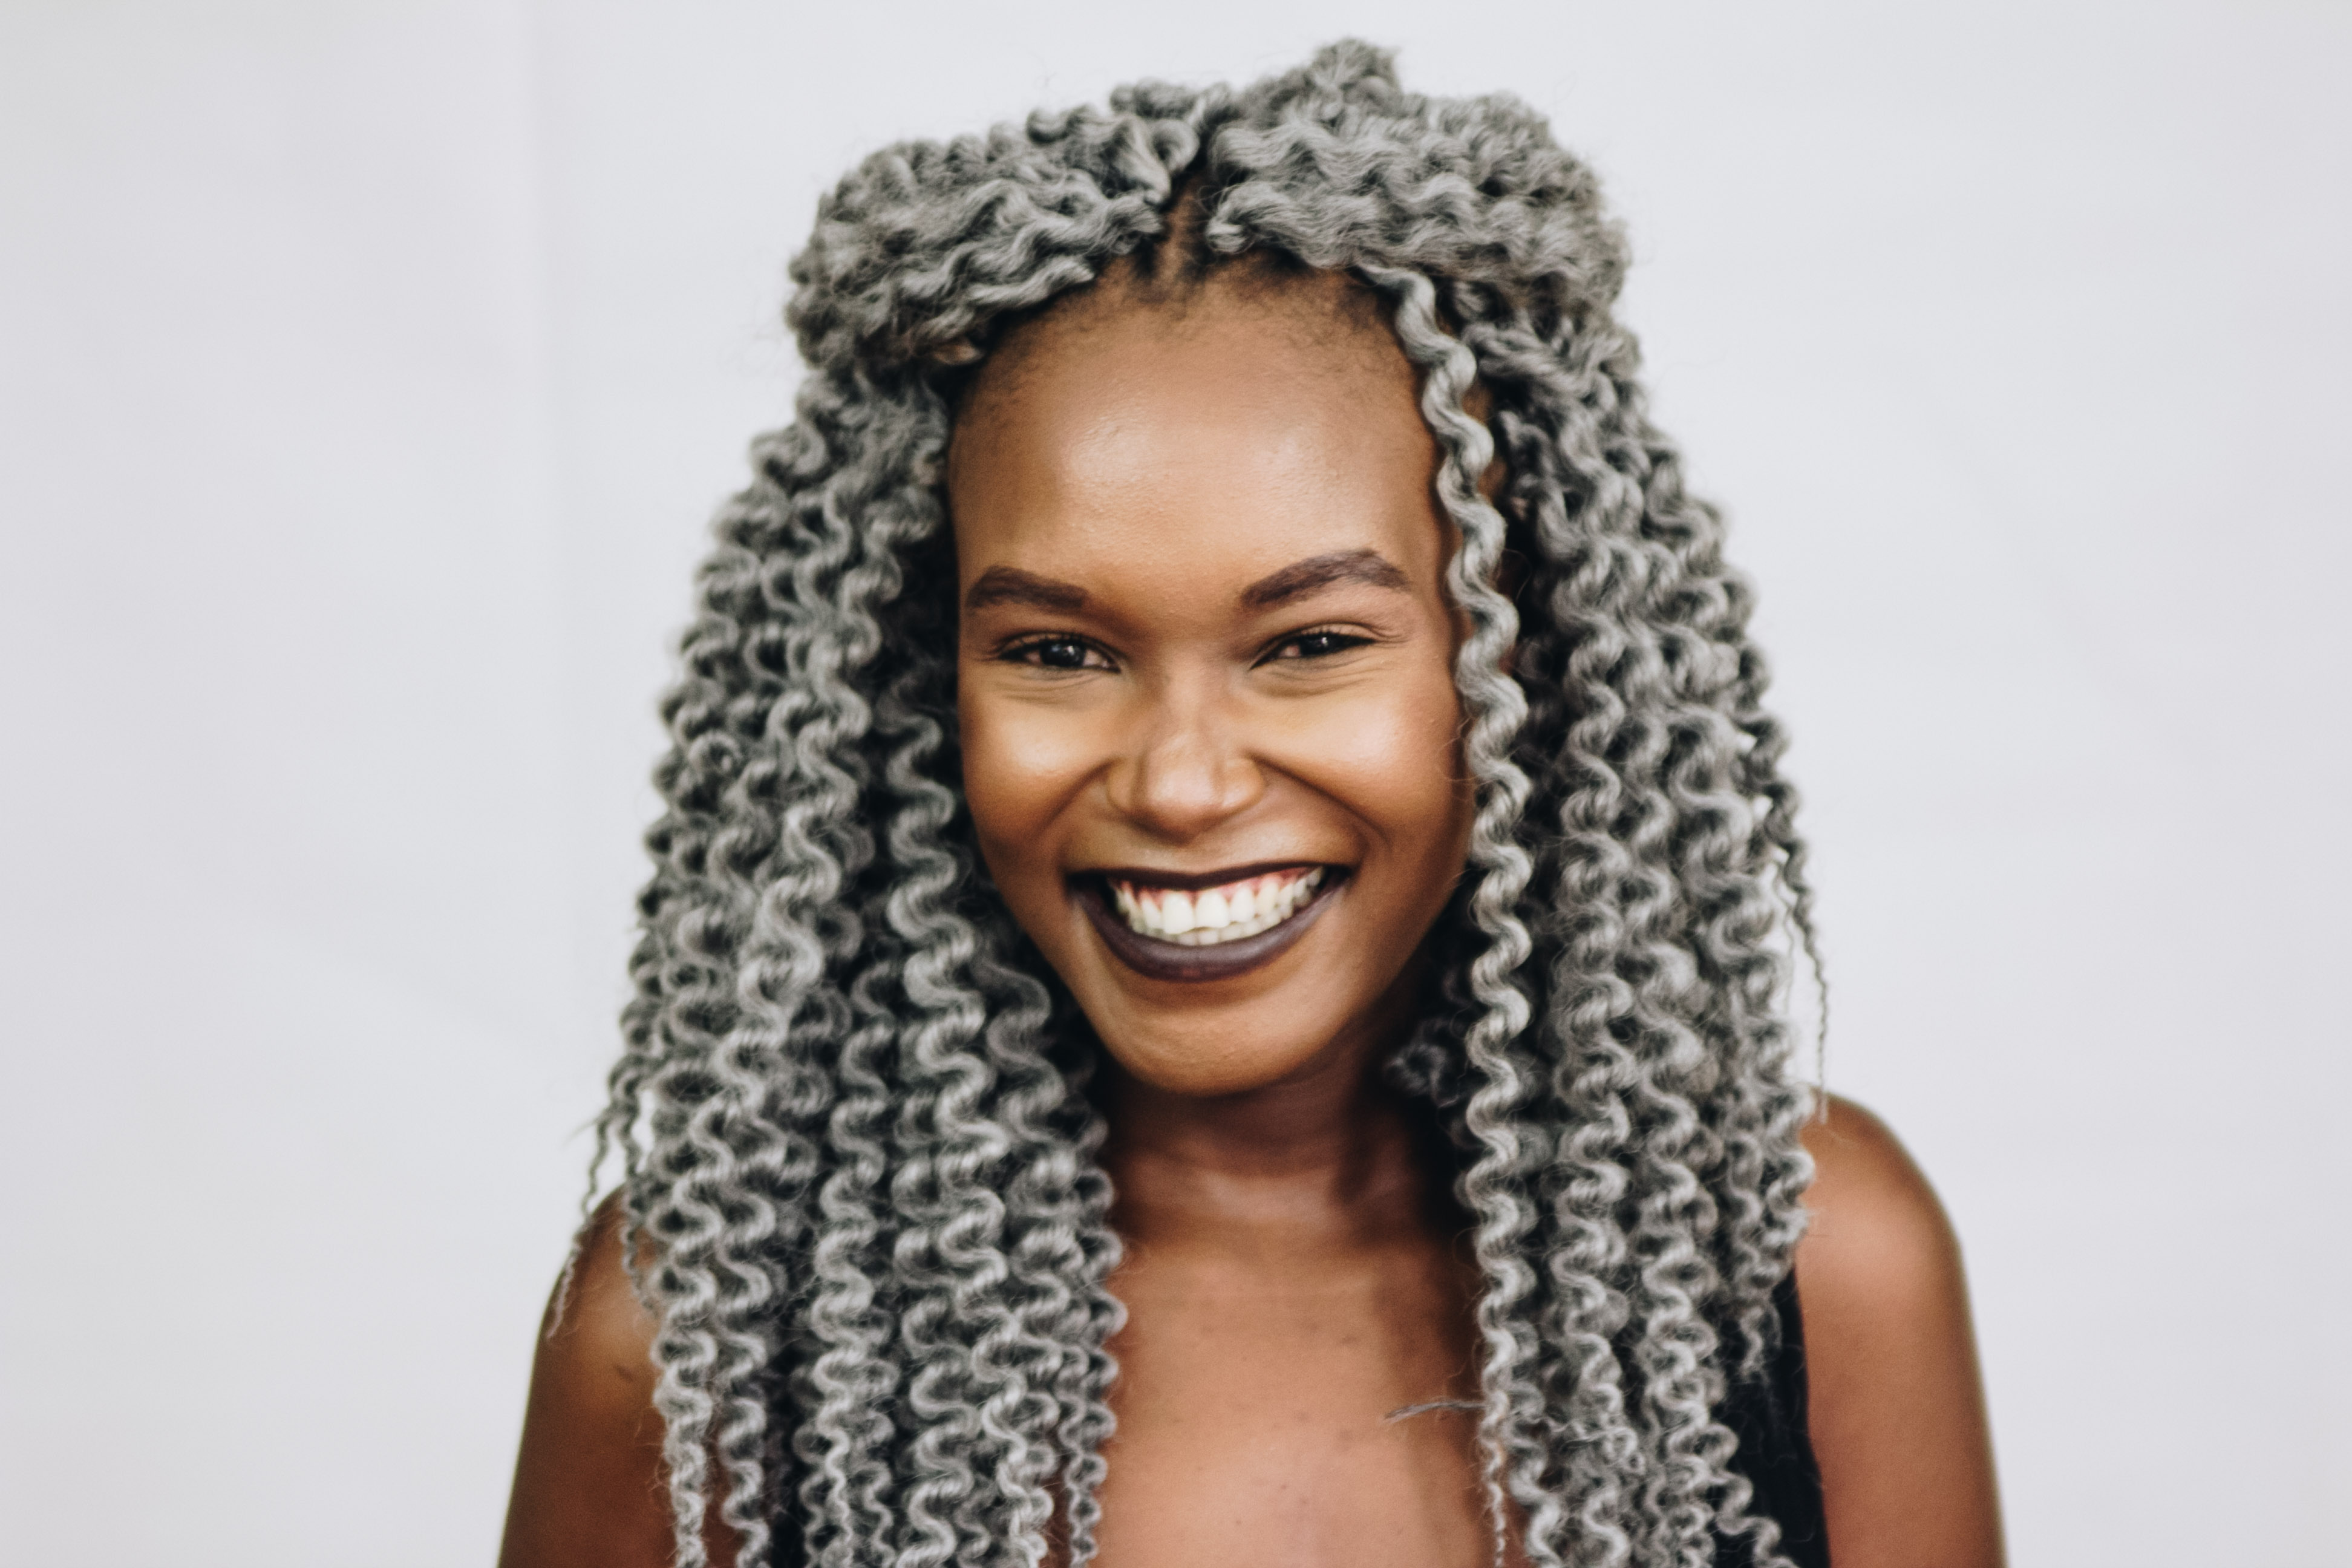 Blue Grey Curly Hair: How to Choose the Right Shade for Your Skin Tone - wide 6